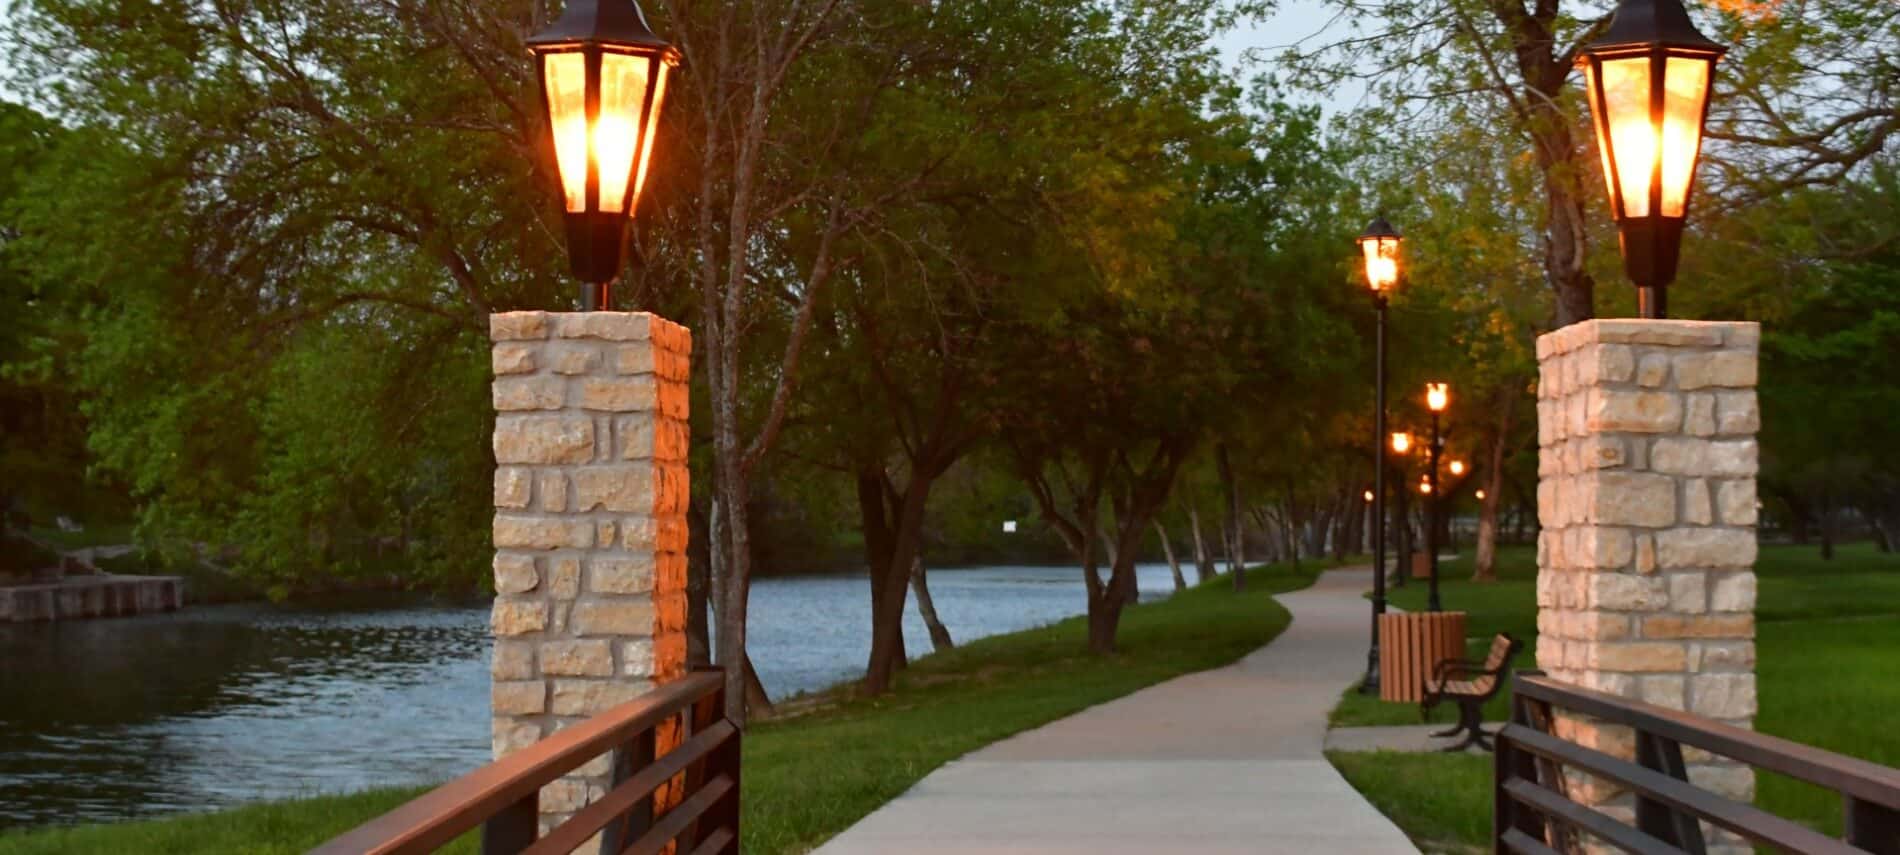 A path lit by carriage lamps along a river at dusk.